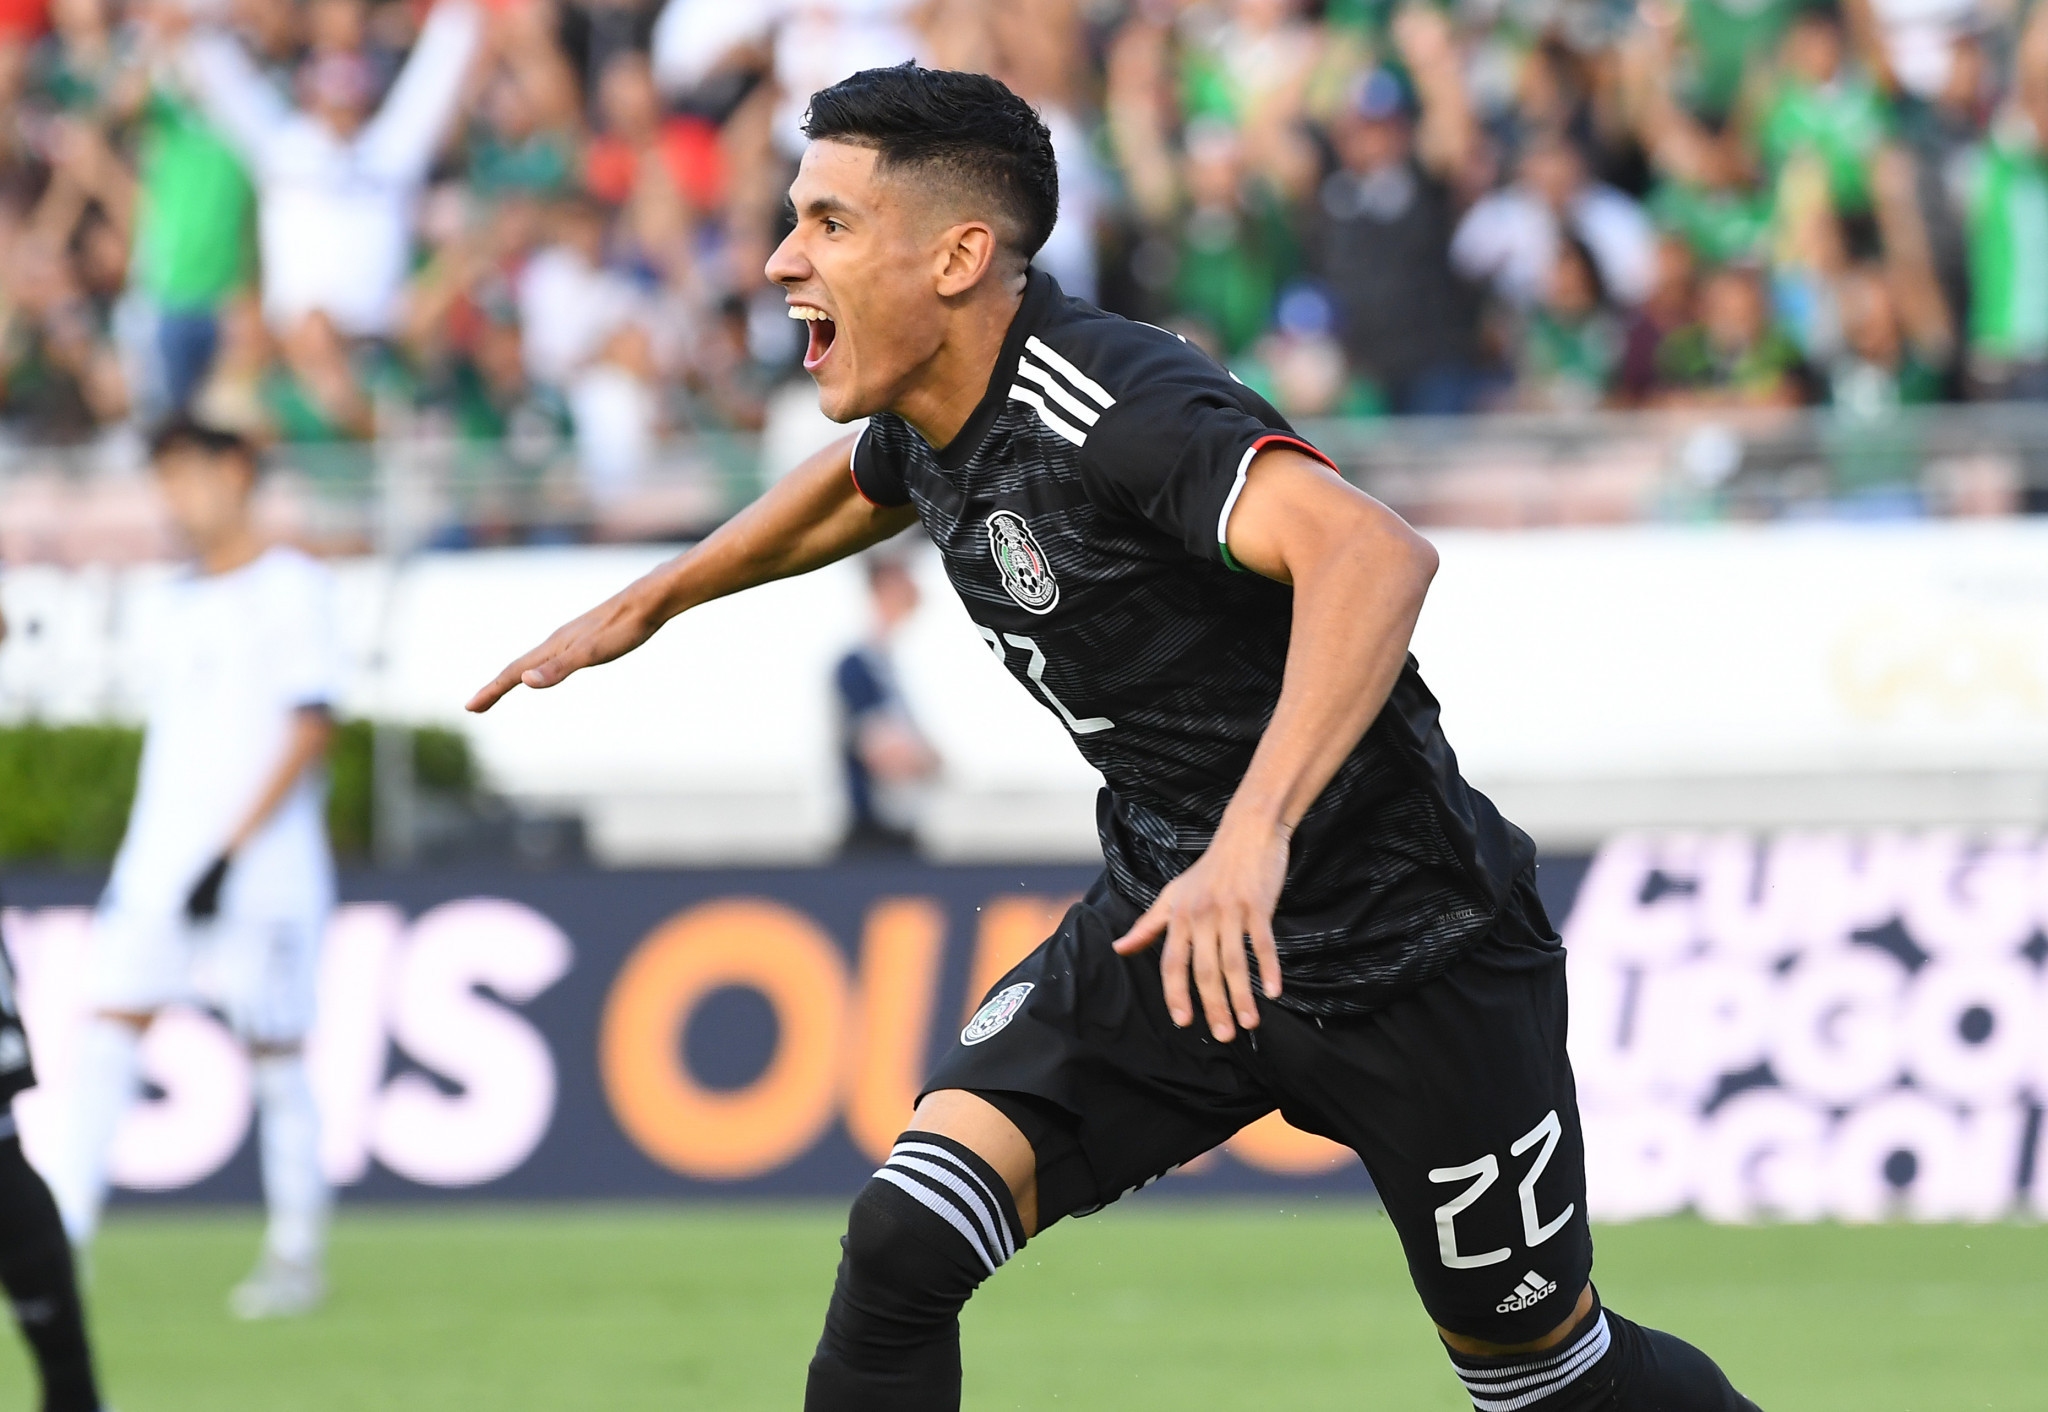 Uriel Antuna scored a hat-trick for Mexico as the Gold Cup opened ©Getty Images